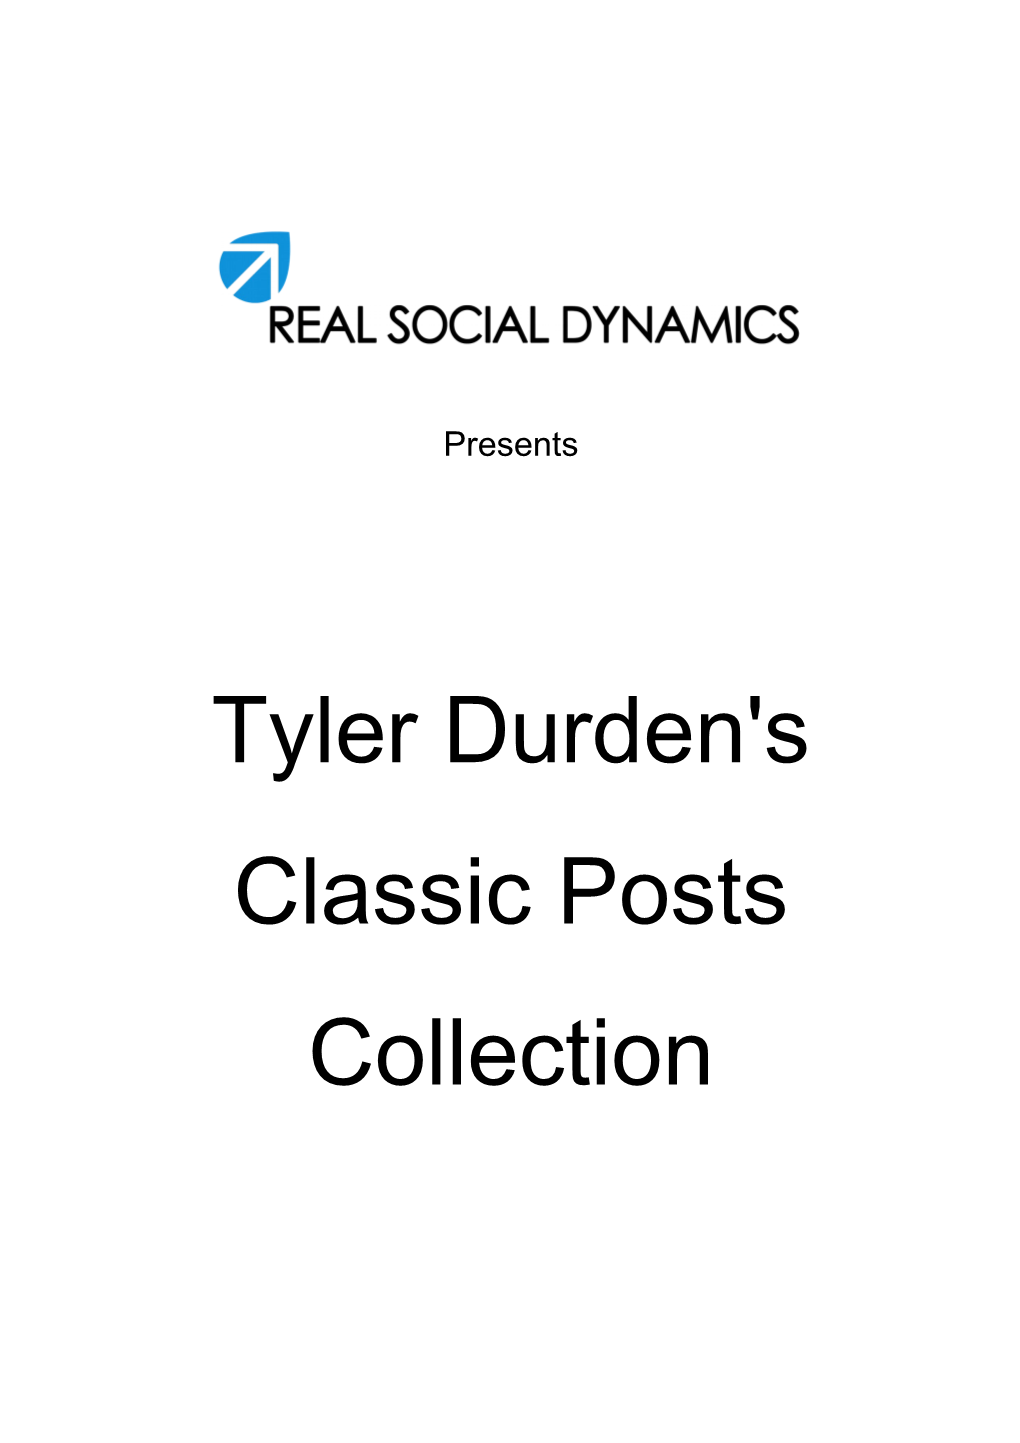 Tyler Durden's Classic Posts Collection TABLE of CONTENTS